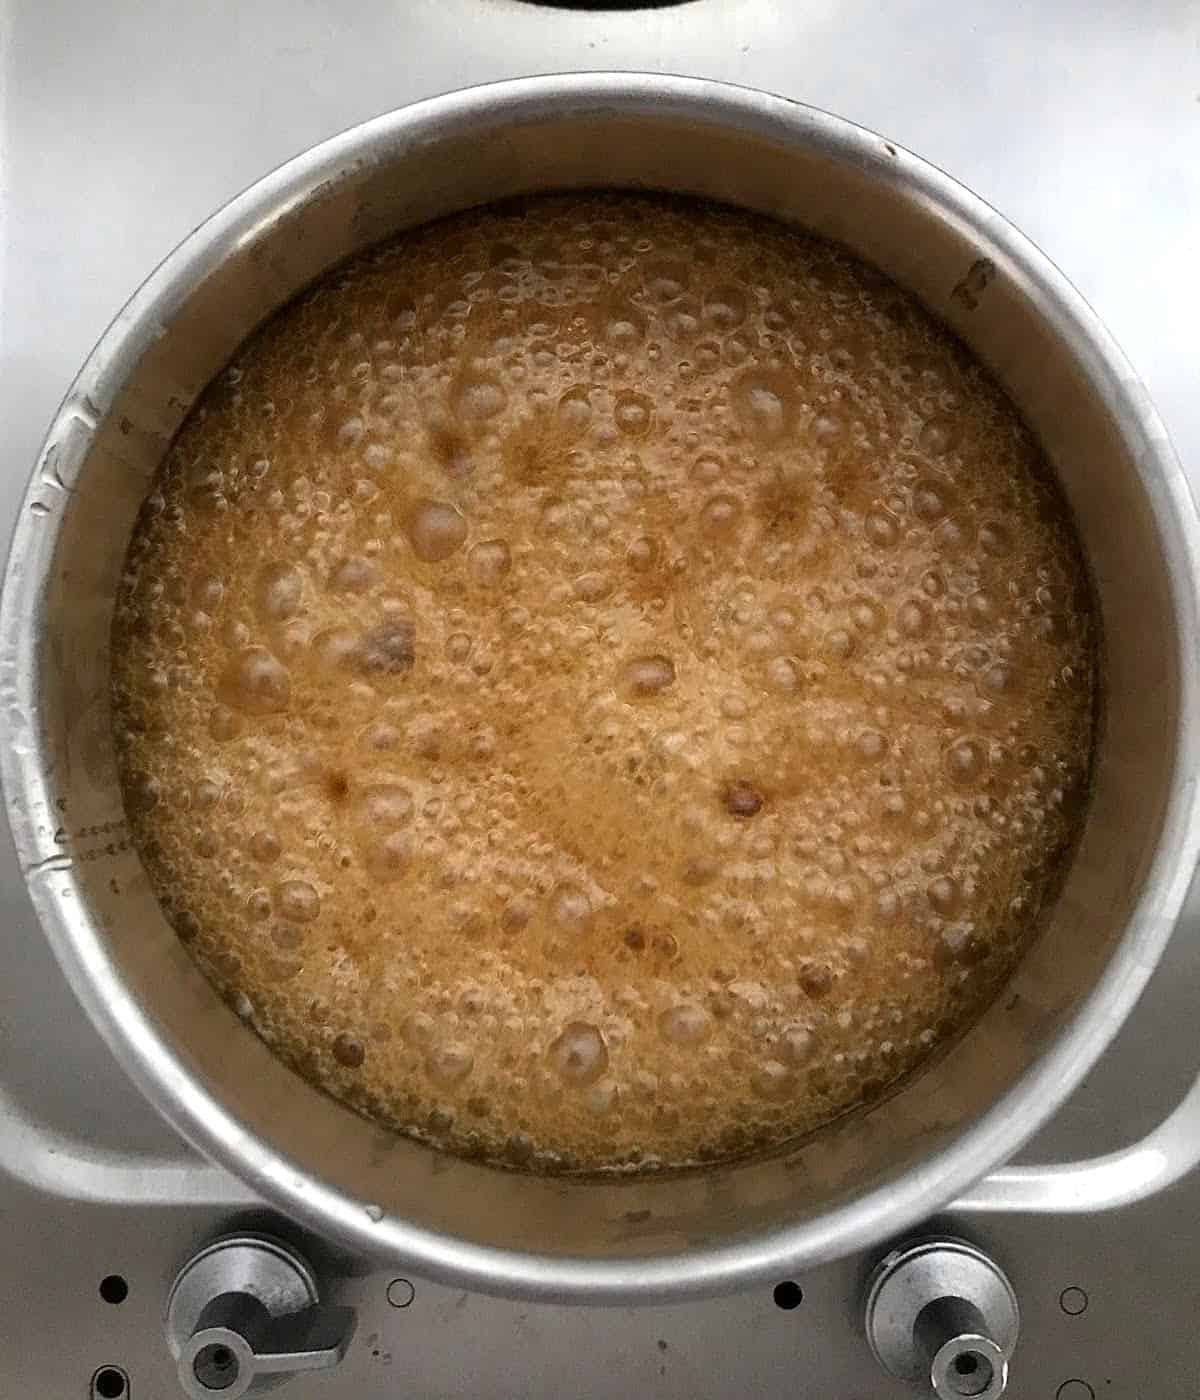 Honey mixture bubbling in a metal saucepan on a metal stove.